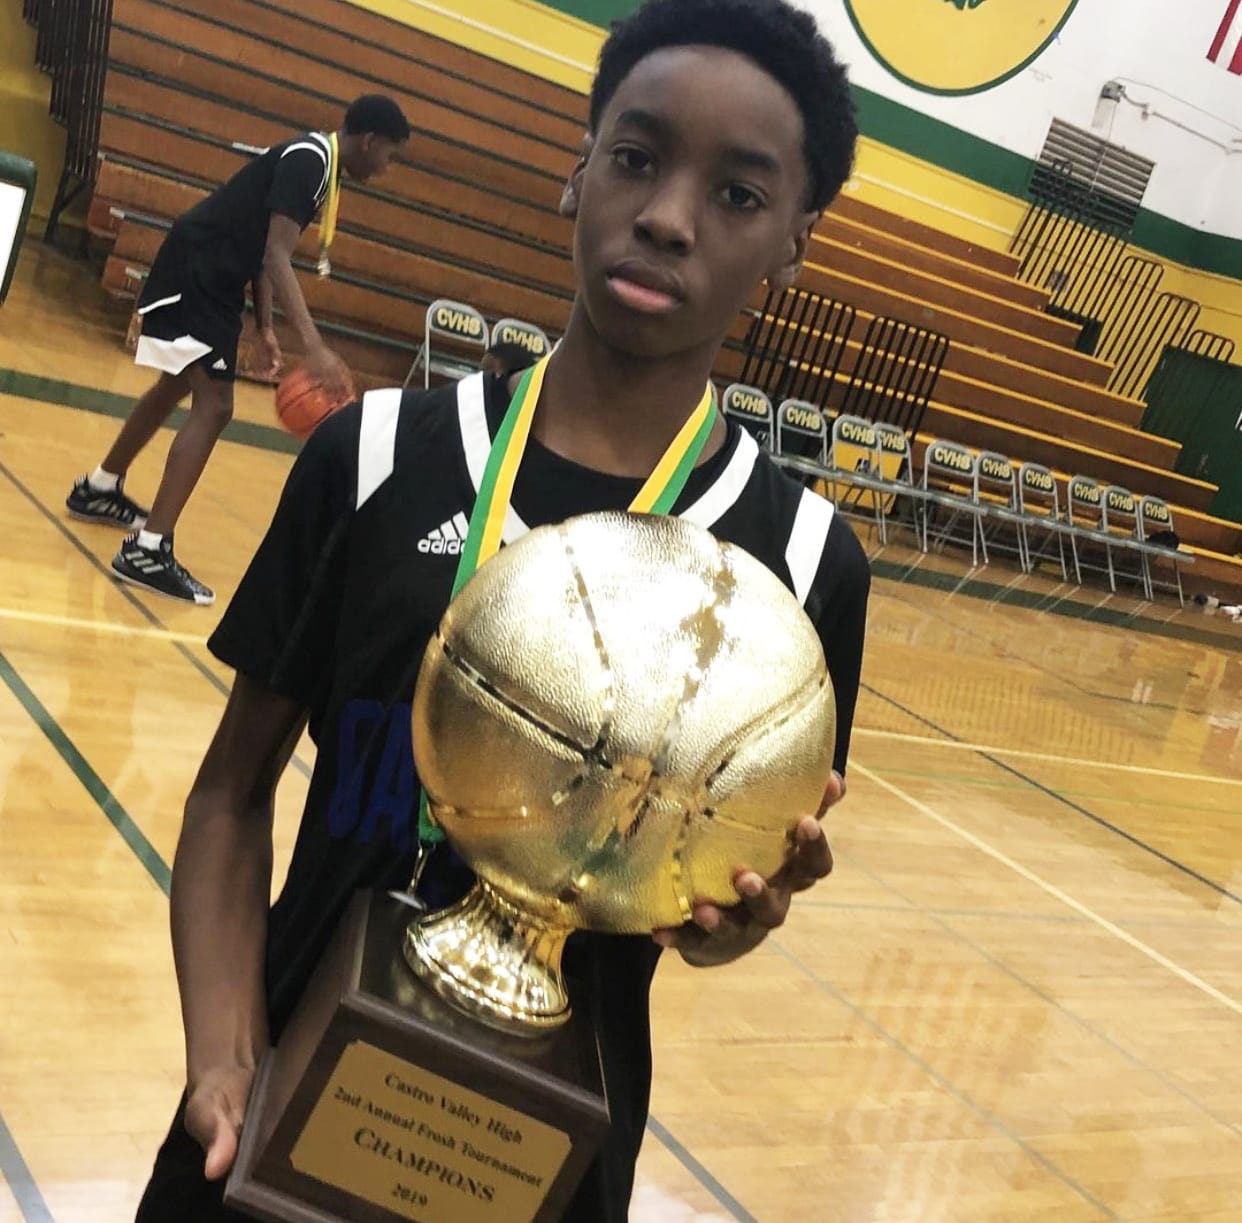 Jeremiah-Riley-14-son-of-Iesha-James-with-basketball-trophy, Help rebuild 14-year-old Jeremiah, struck by a stray bullet in East Oakland, Local News & Views 